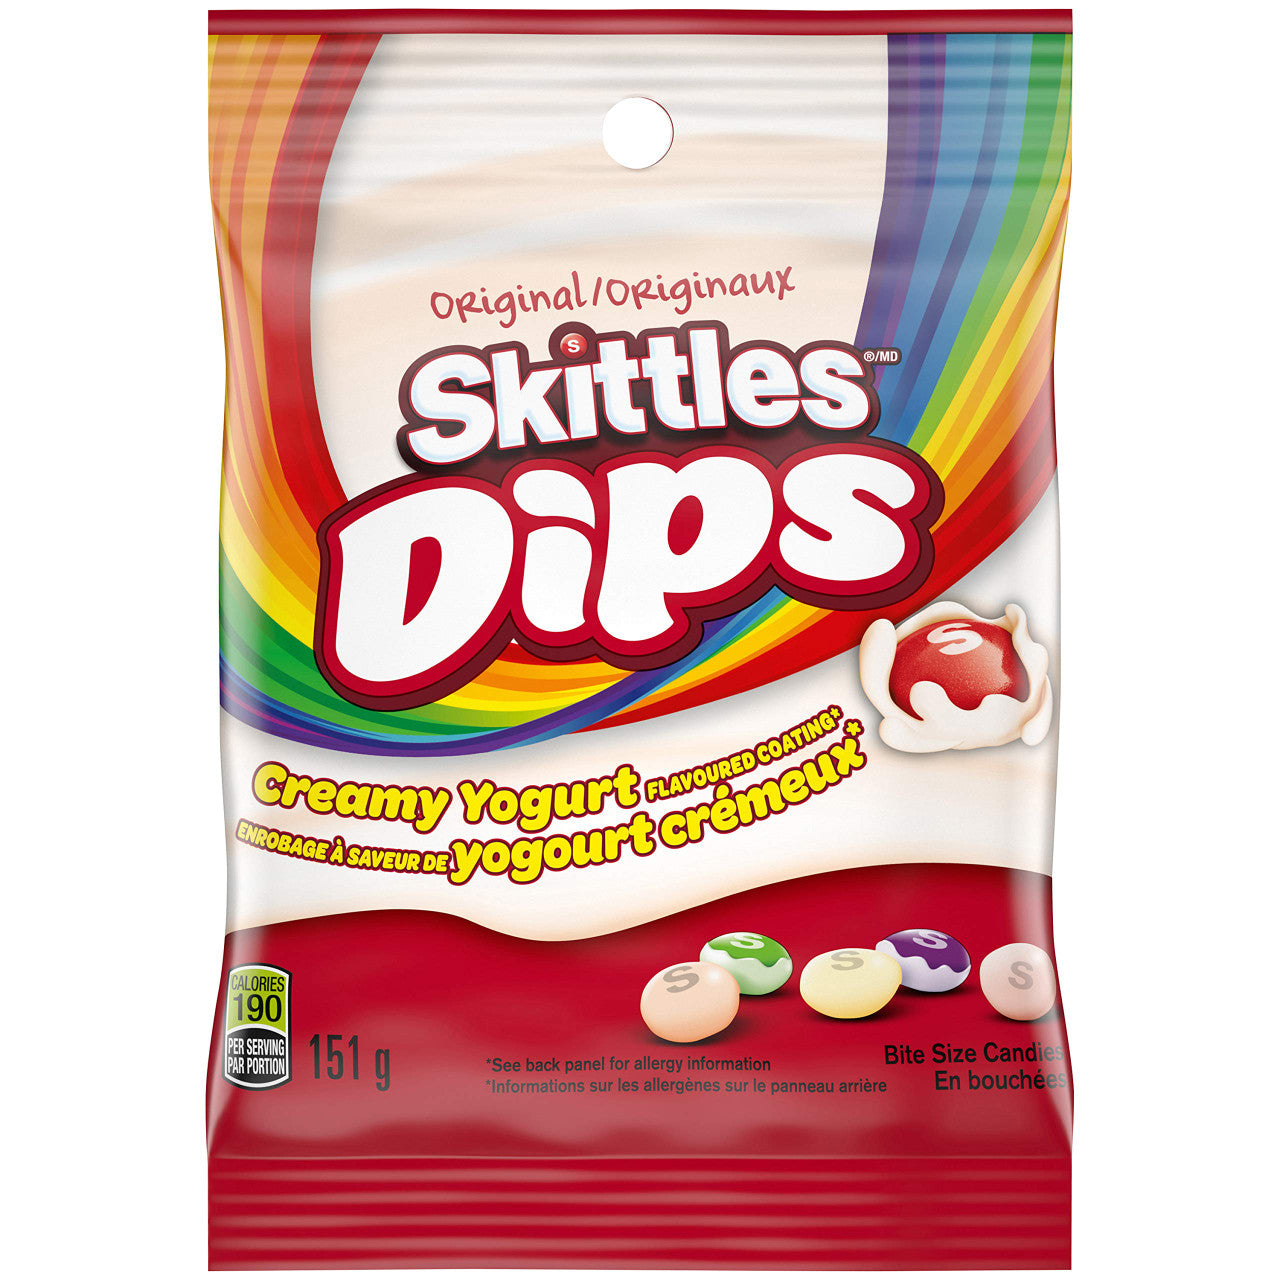 Skittles Original Dips Creamy Yogurt Covered Fruit Candy, 12 Count {Imported from Canada}